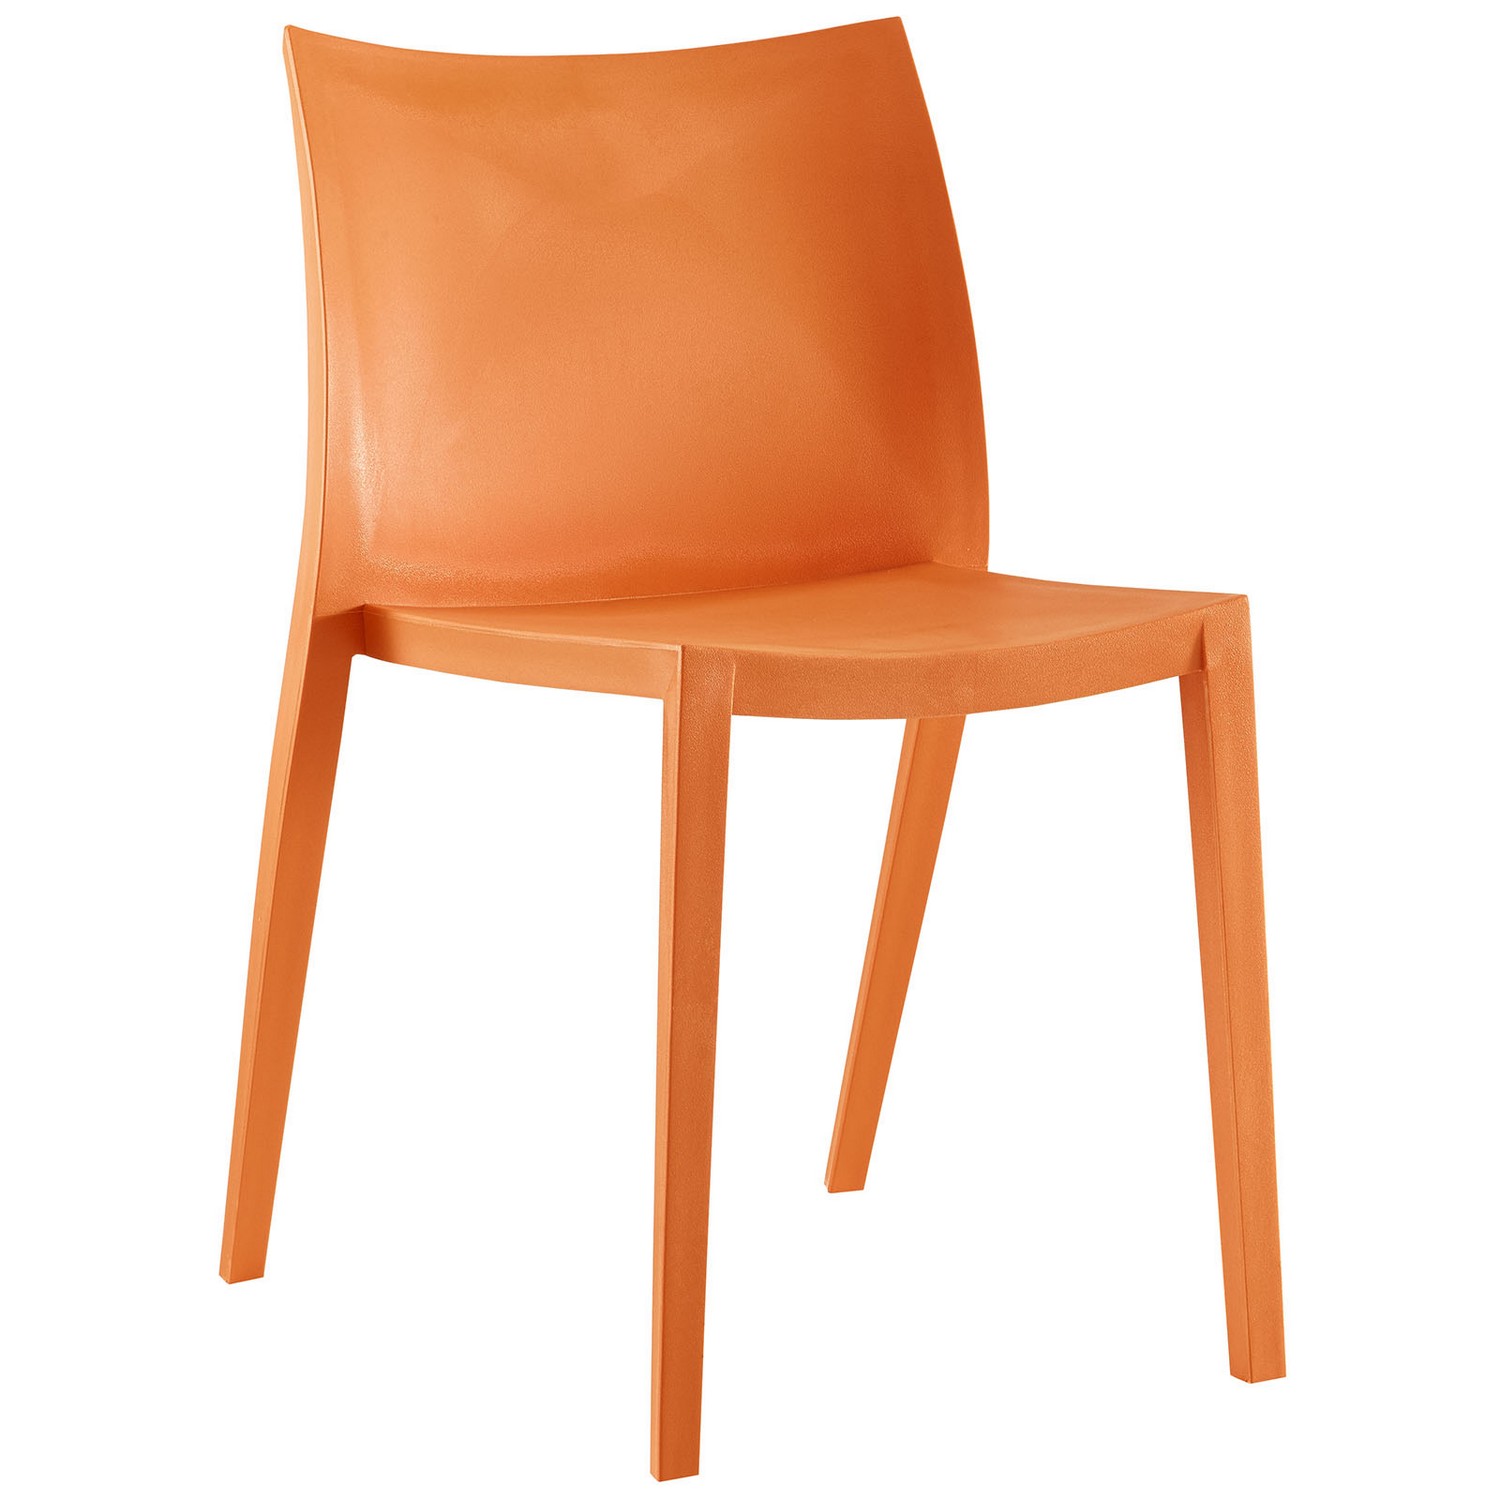 Modway Gallant Dining Side Chair - Orange